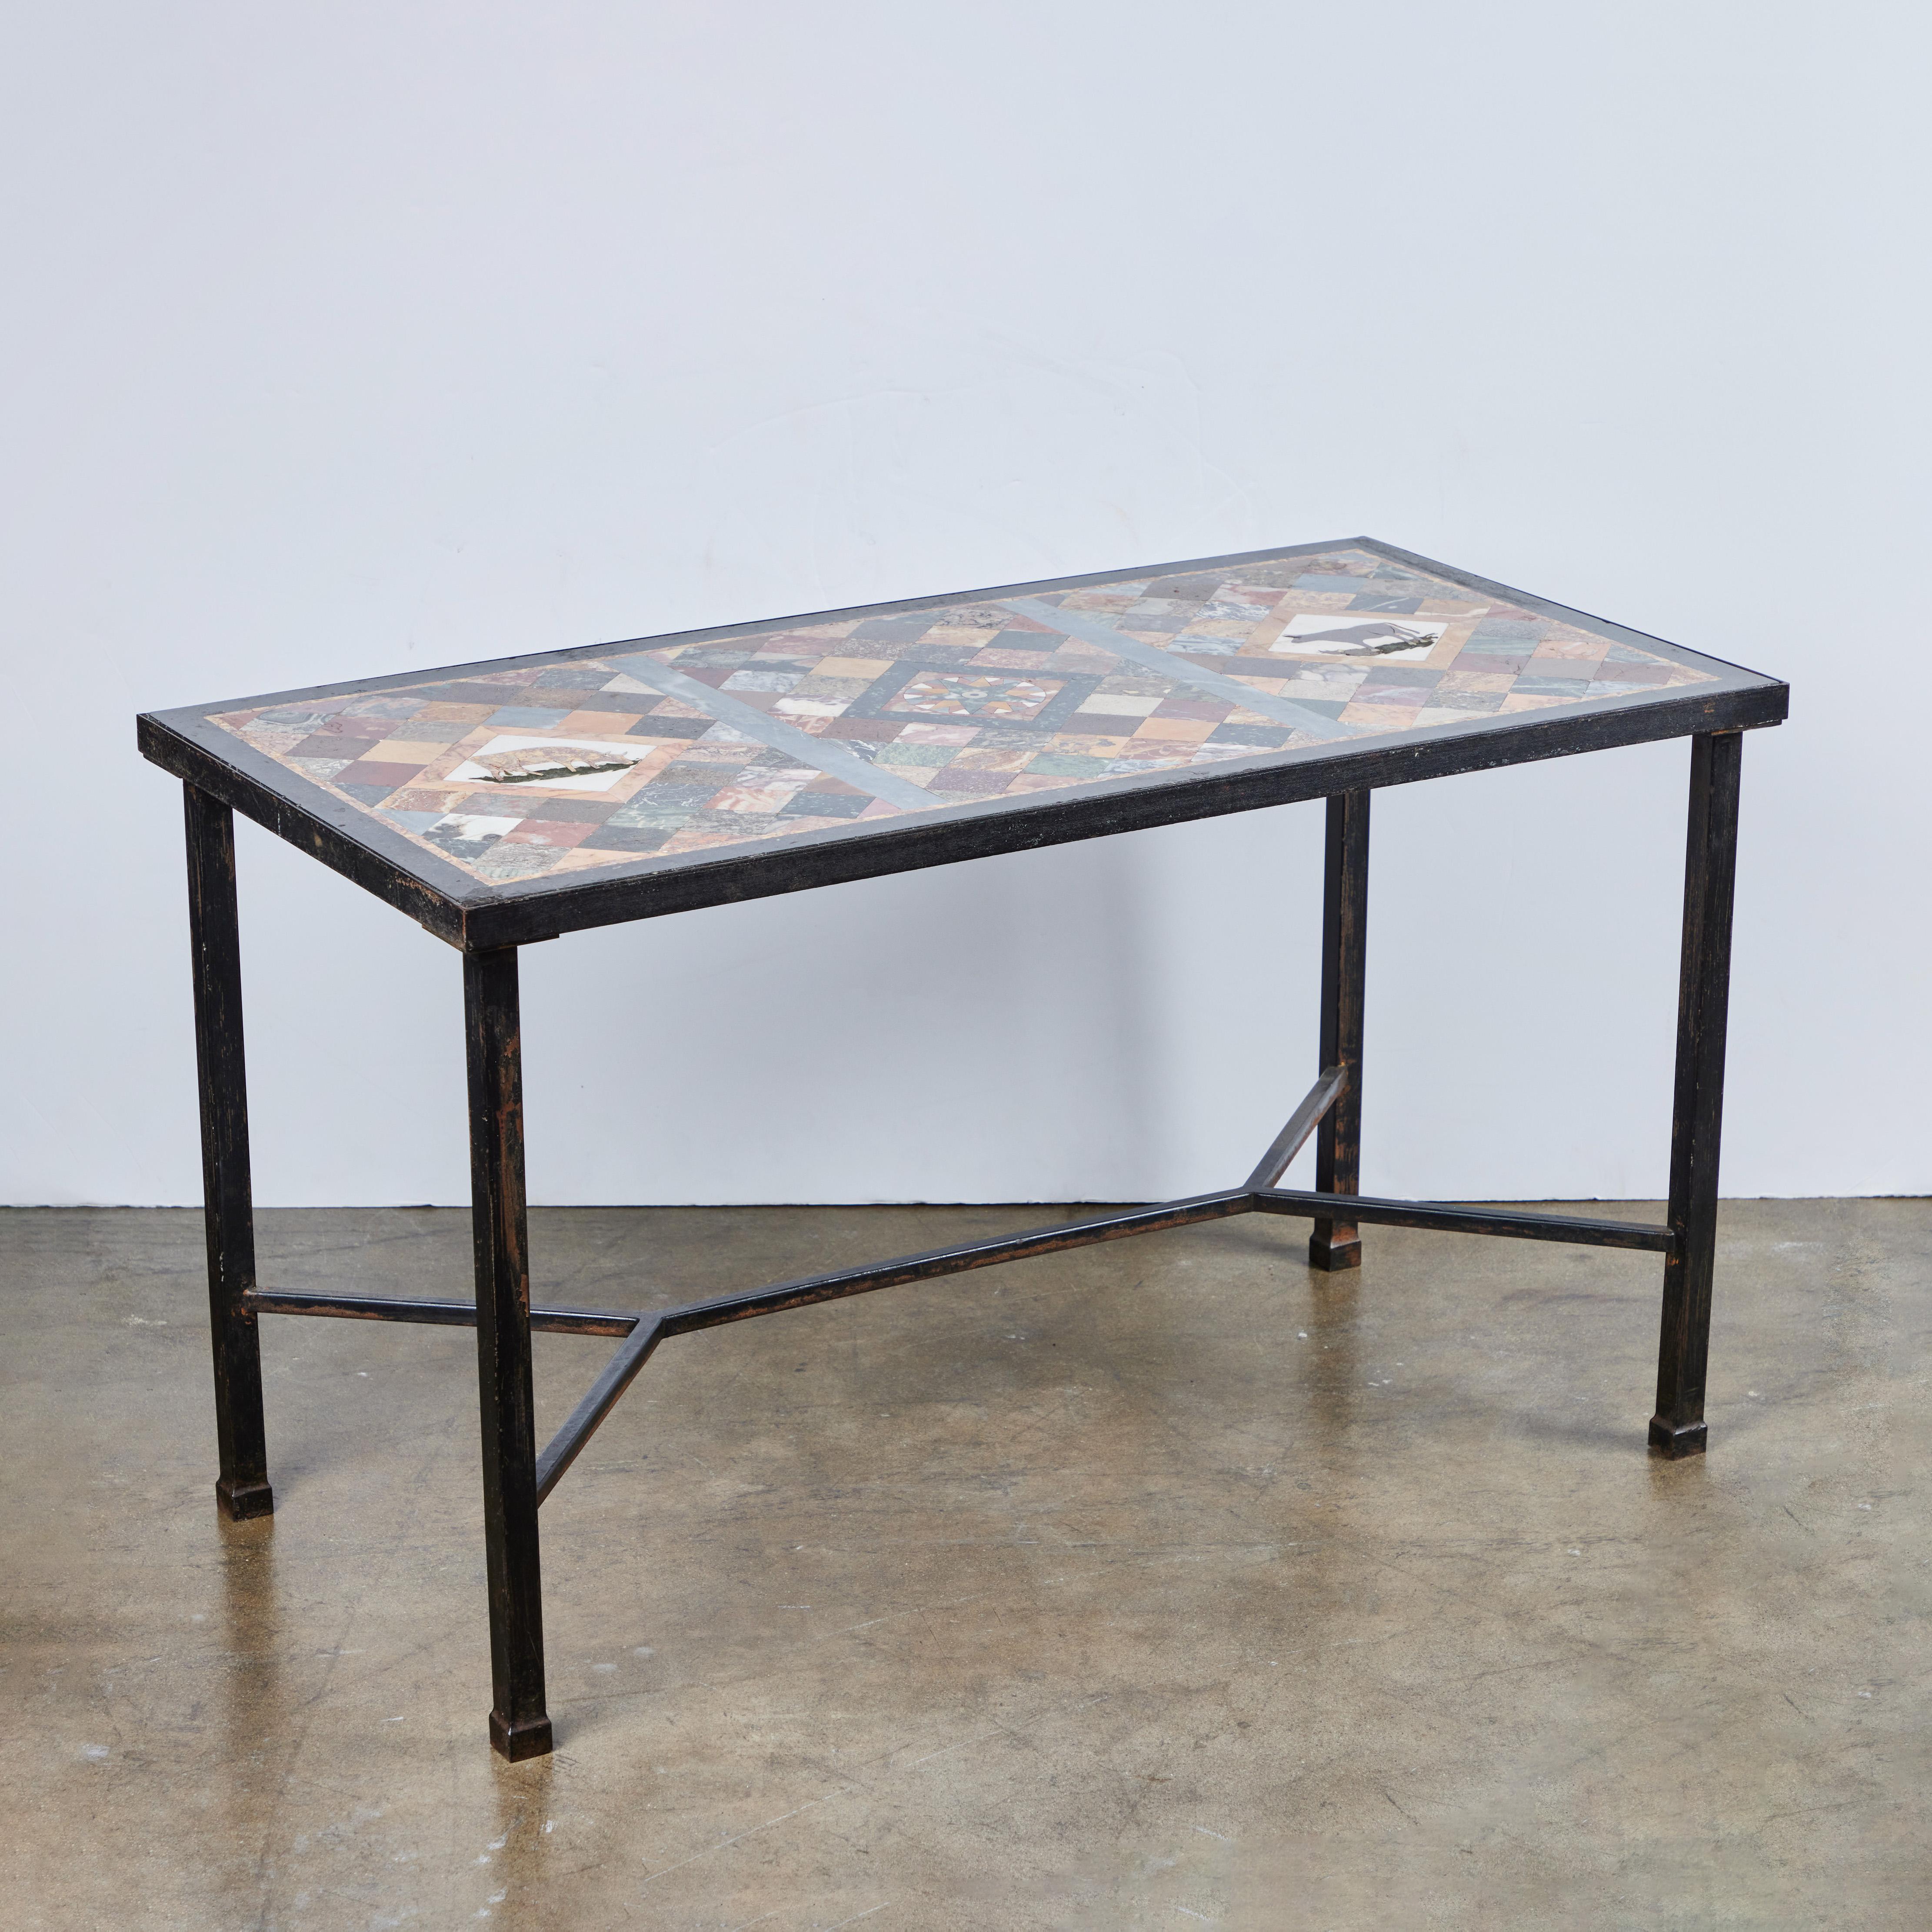 A circa 1940s specimen marble top featuring bulls and a center star pattern set in a contemporary iron base.